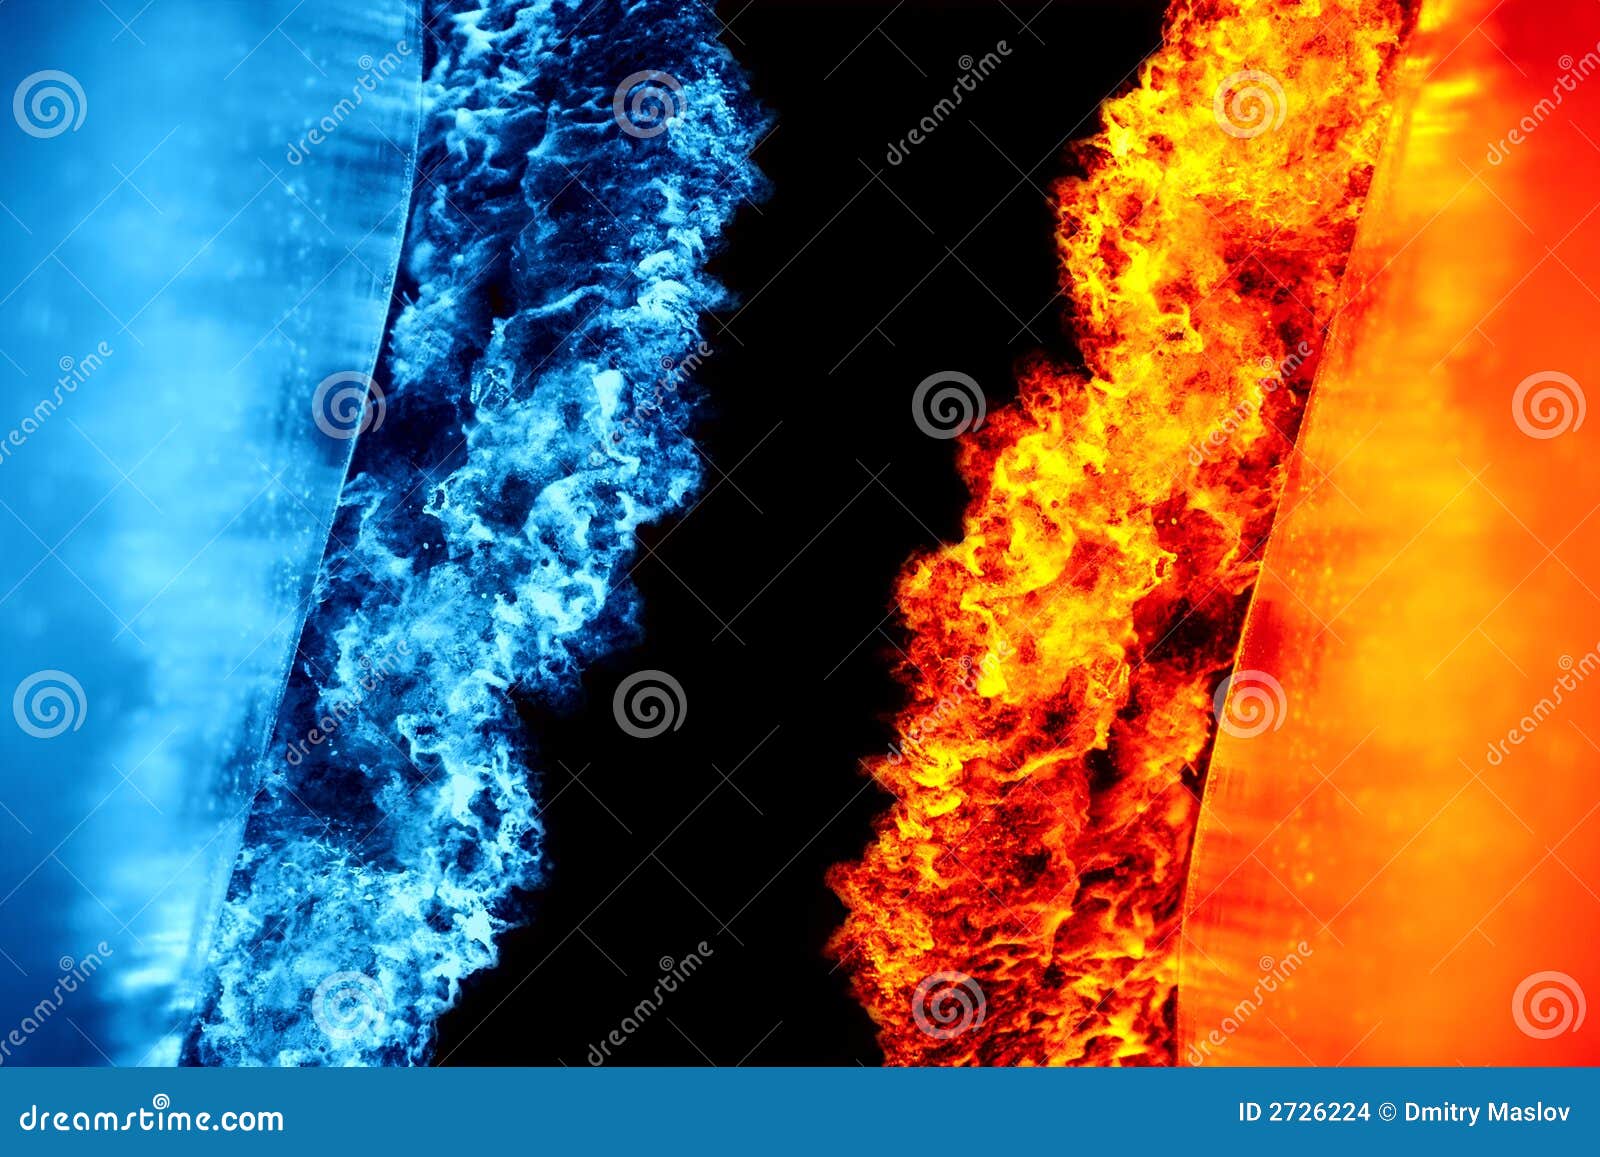 7 812 Fire Ice Background Photos Free Royalty Free Stock Photos From Dreamstime